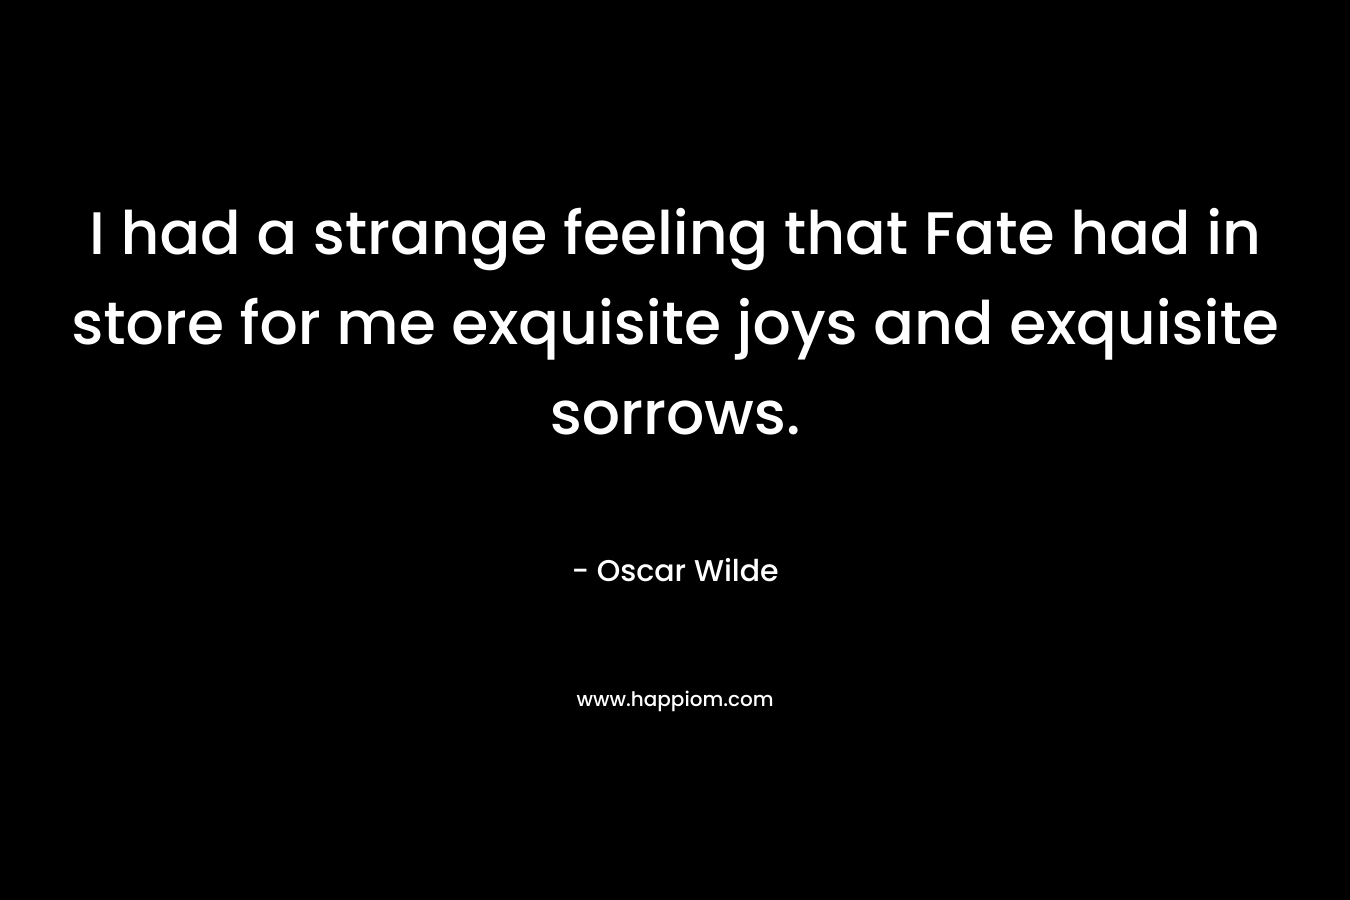 I had a strange feeling that Fate had in store for me exquisite joys and exquisite sorrows.